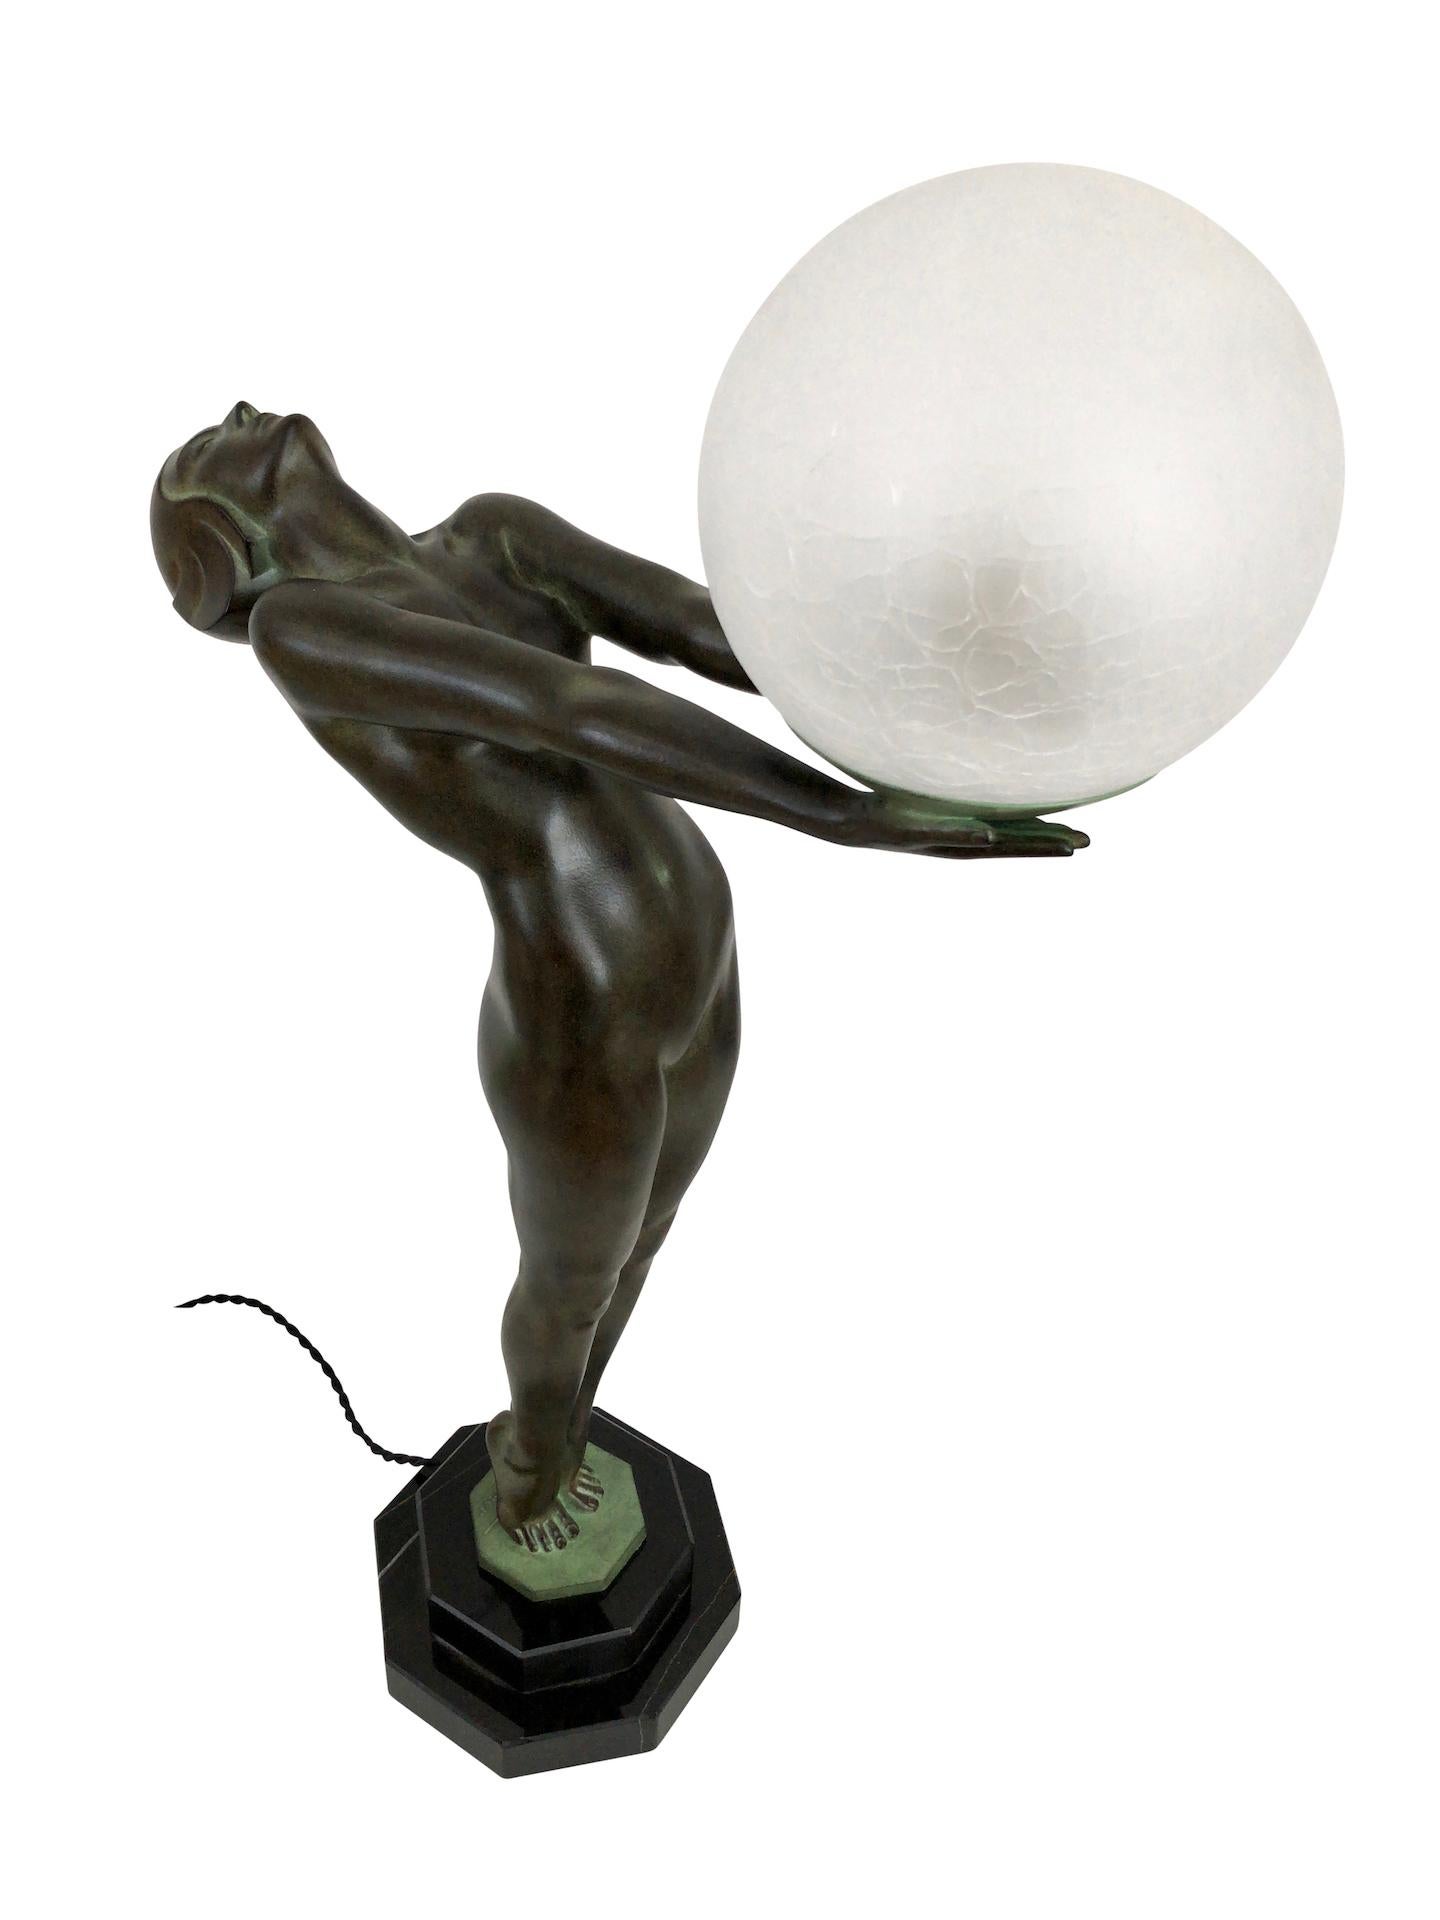 French Art Deco Lumina Sculpture Clarté Lamp Nude Dancer with a Ball by Max Le Verrier For Sale